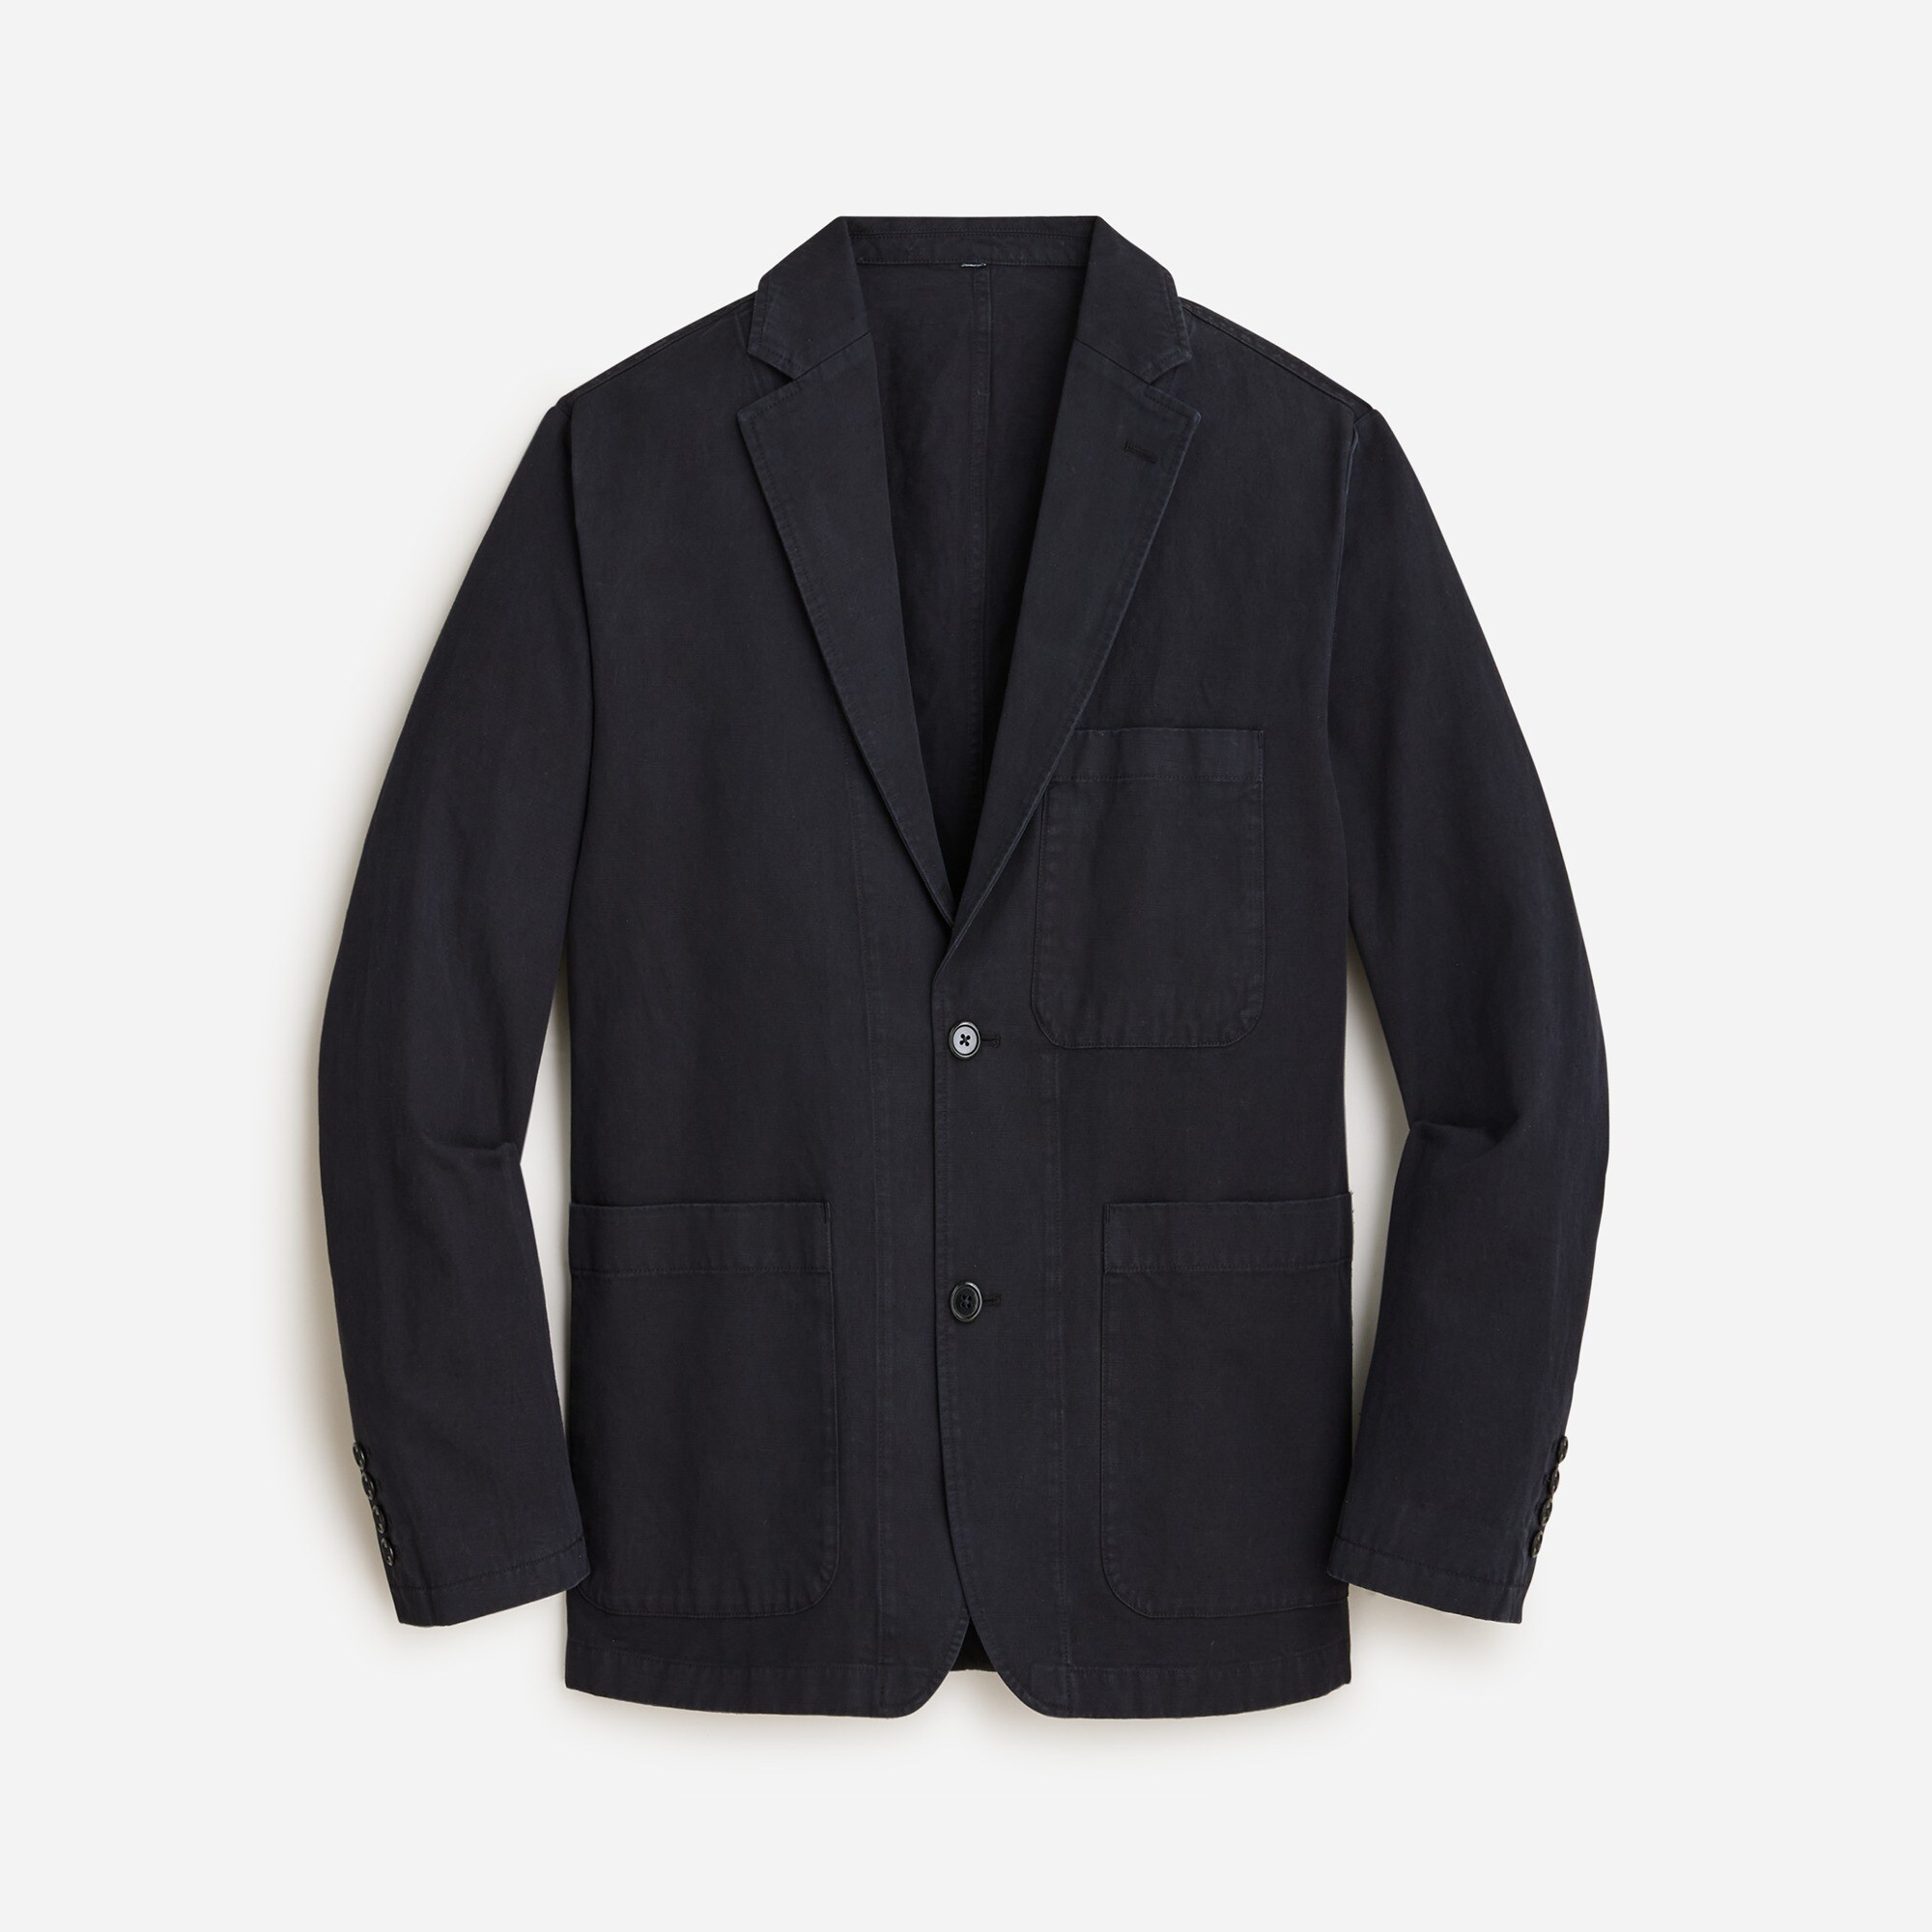  Garment-dyed cotton-linen chino suit jacket